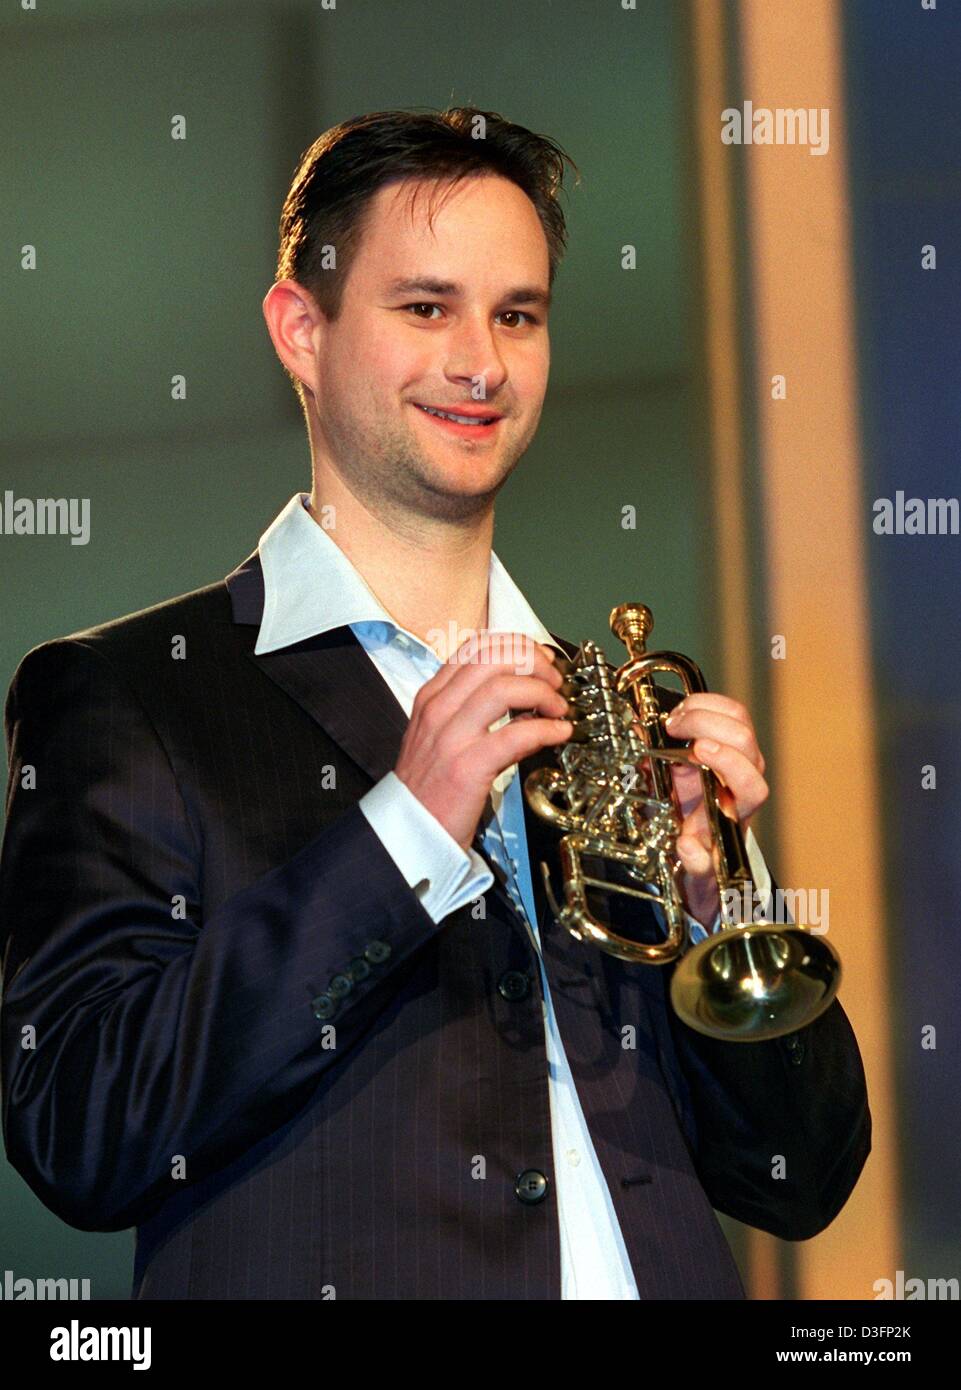 dpa) - Hungarian trumpet player Gabor Boldoczki poses with his trumpet in  Berlin, 4 March 2003. Last year, the 27-year-old musician had presented his  debut CD Stock Photo - Alamy